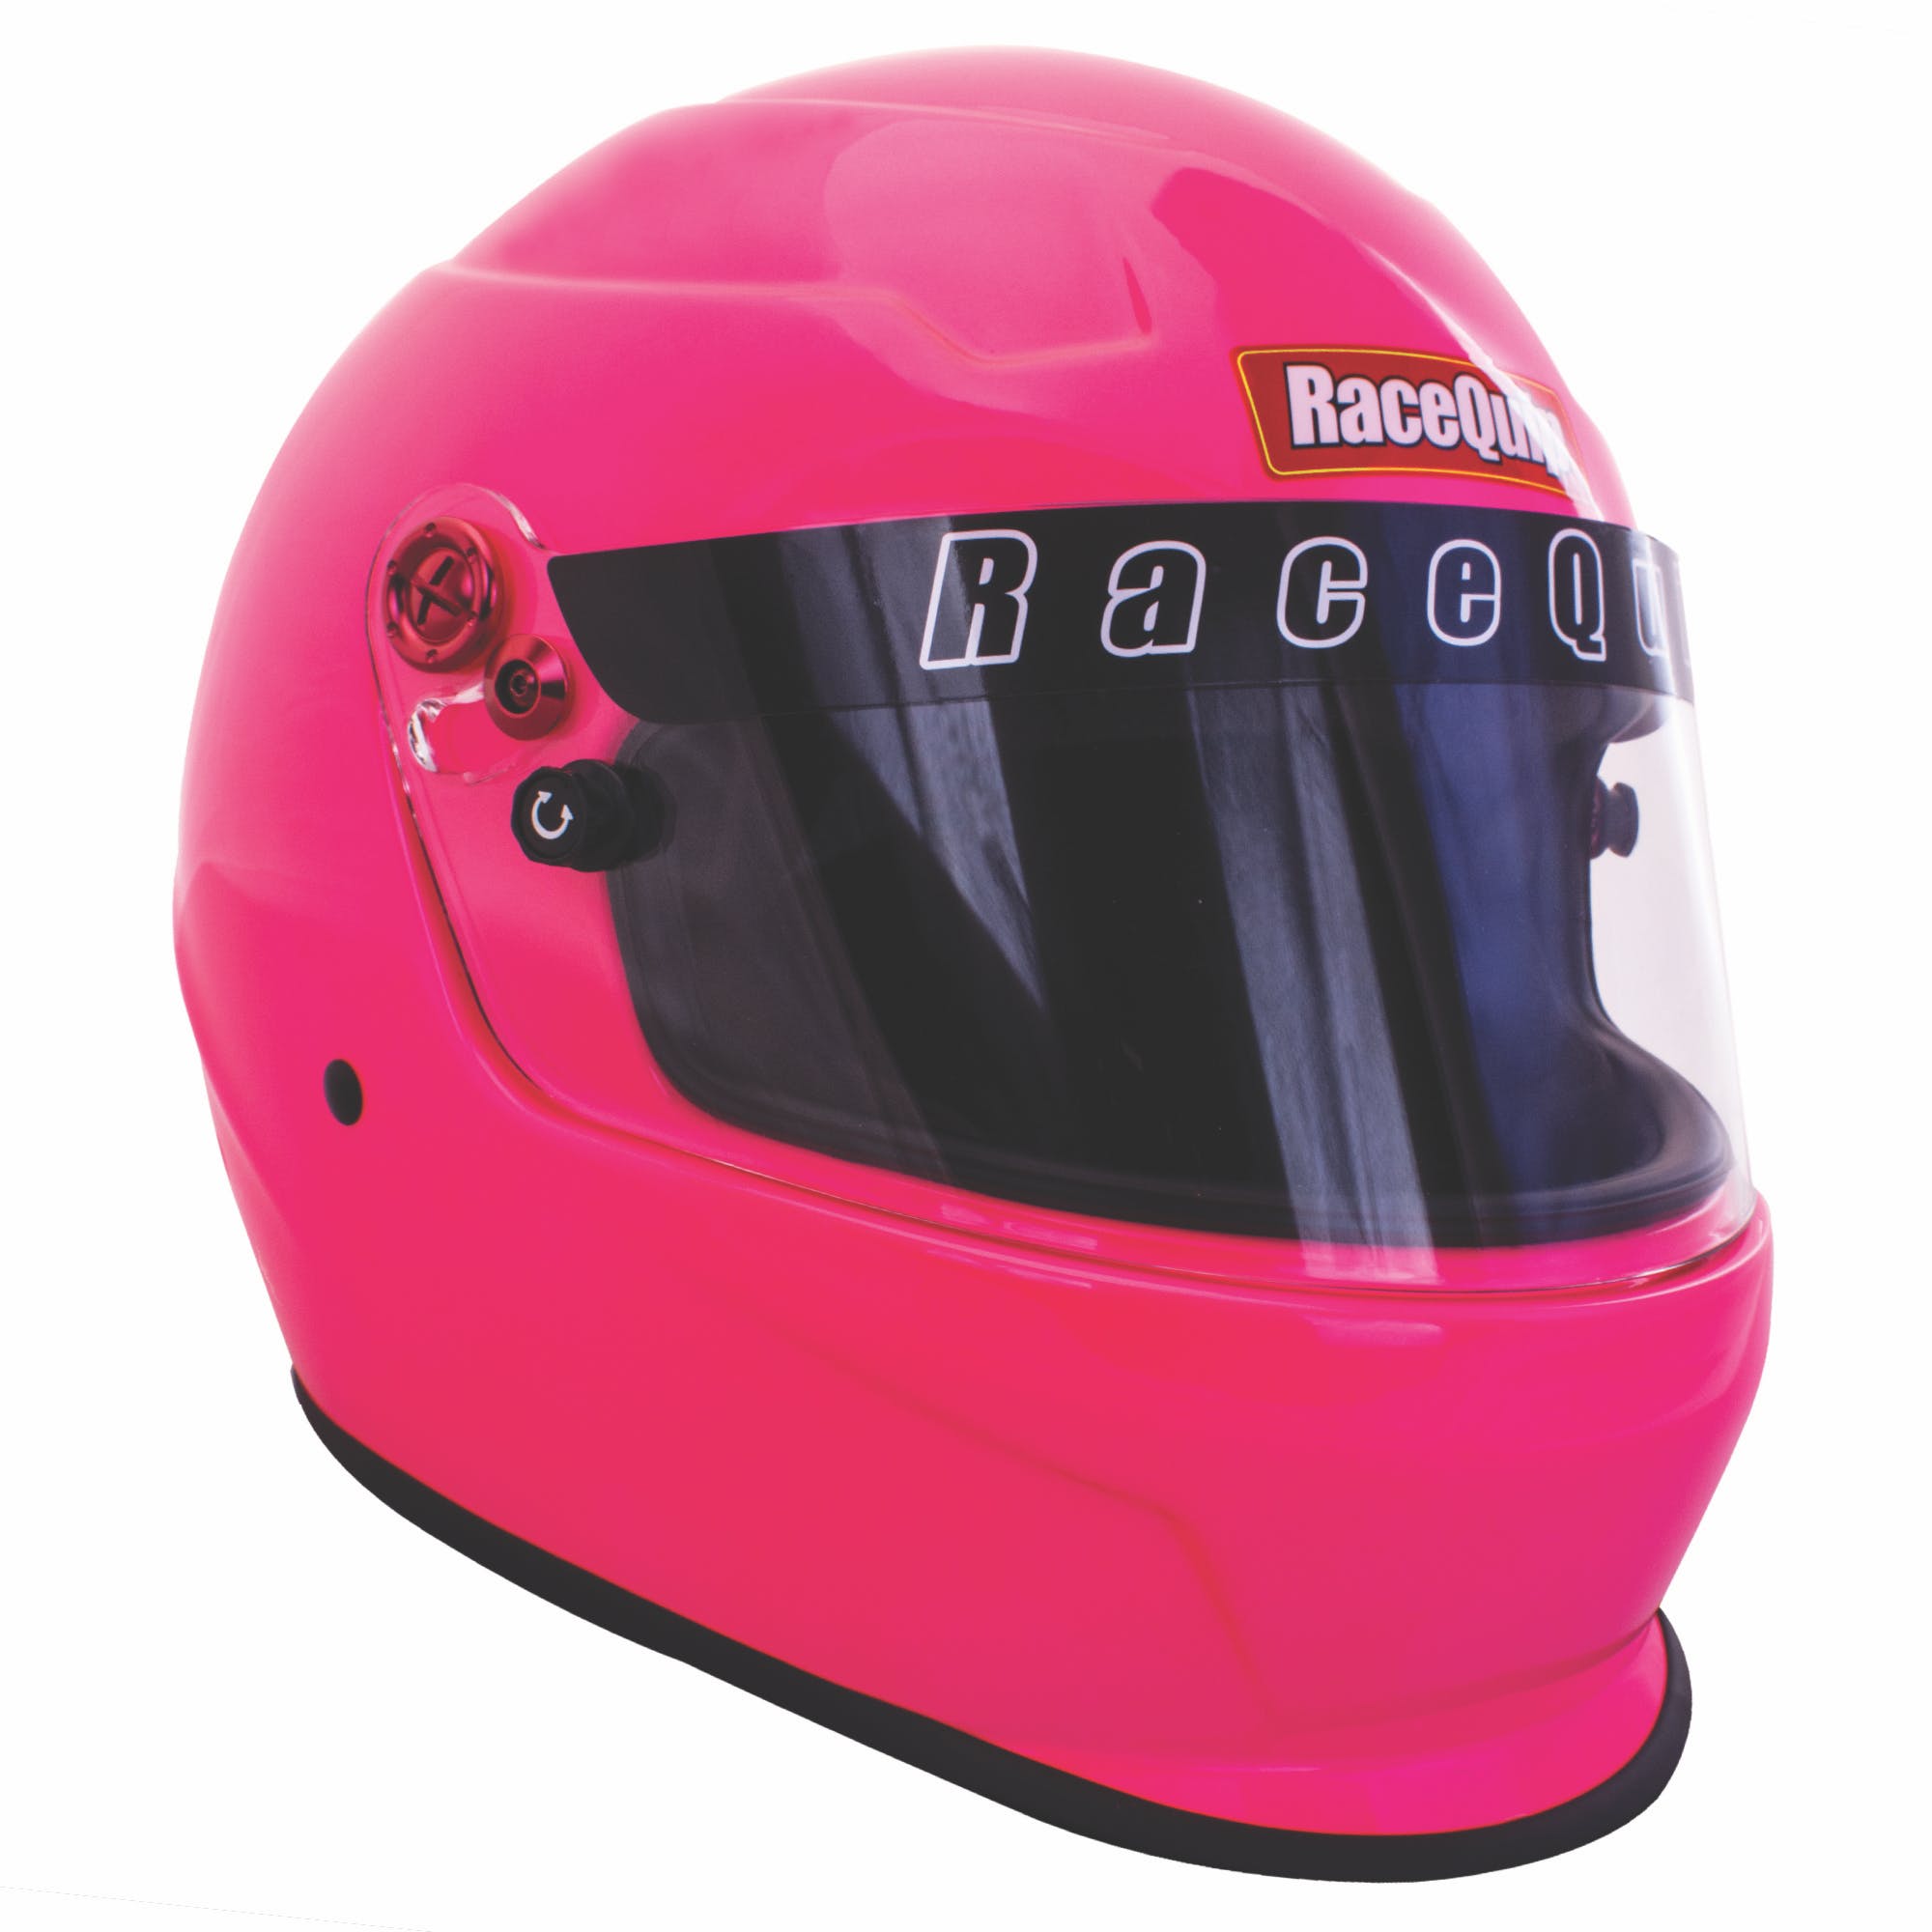 RaceQuip 276880 PRO20 Full Face Helmet Snell SA2020 Rated; Hot Pink XX-Small